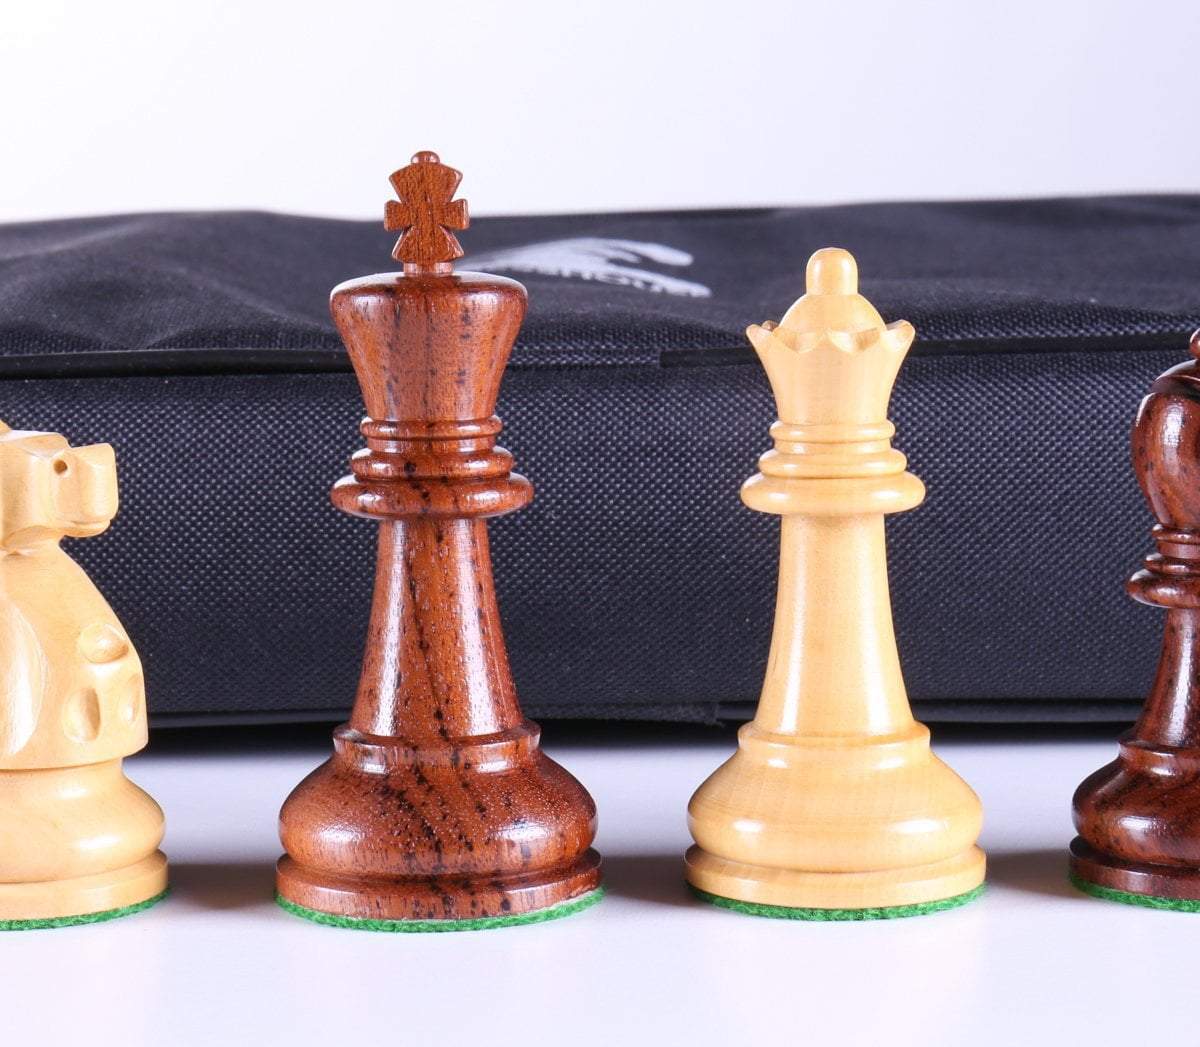 3 5/8" Ultimate Style Wooden Chess Pieces - Anjan - Chess Set - Chess-House